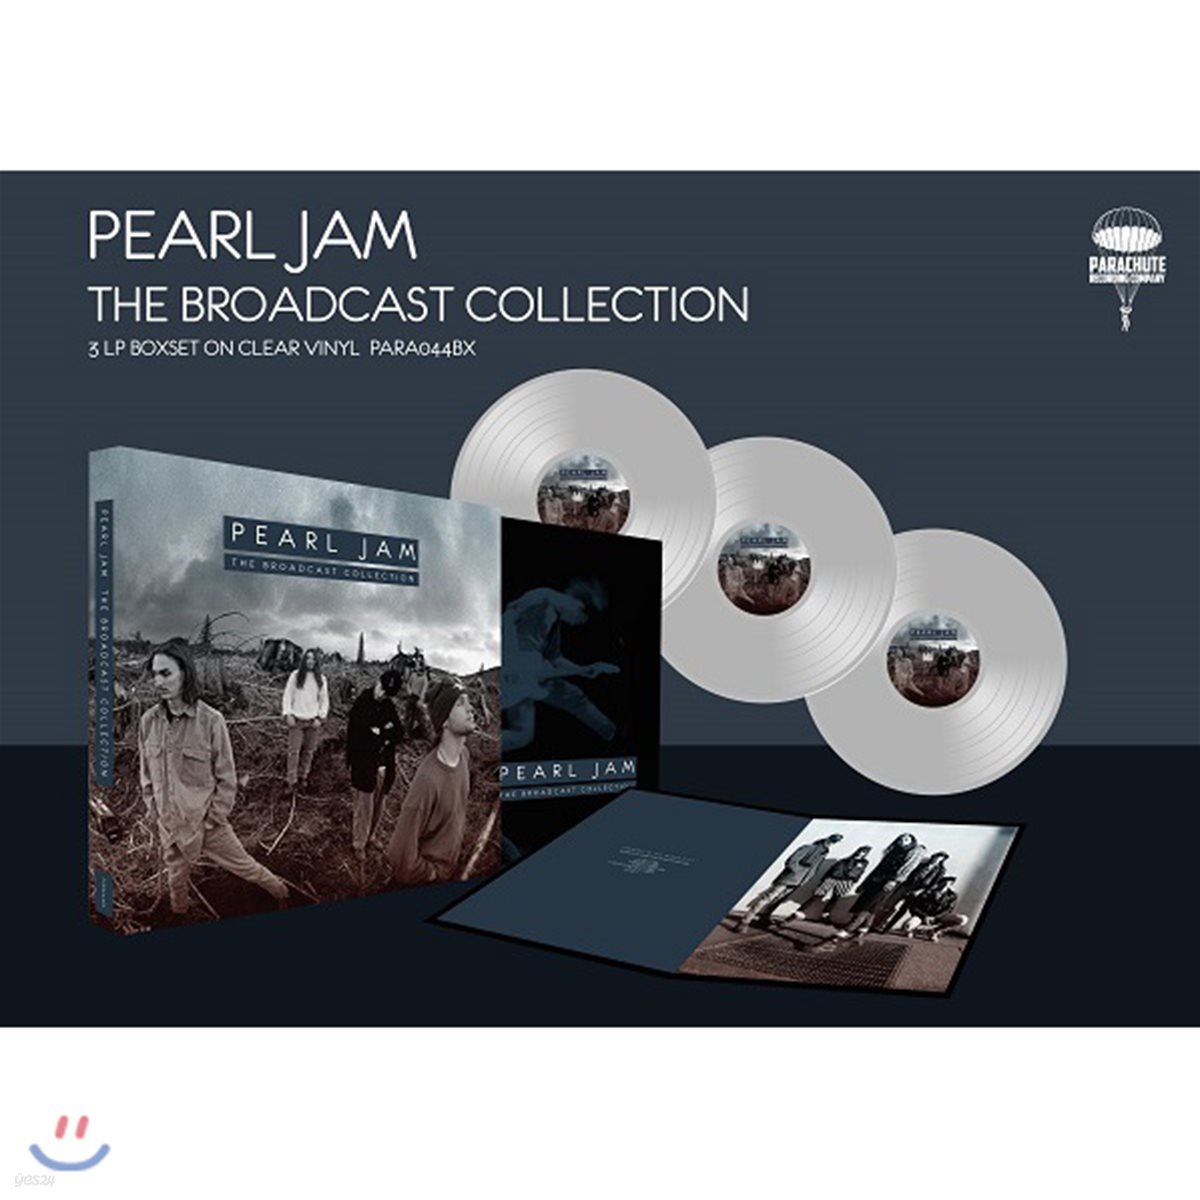 Pearl Jam (펄잼) - The Pearl Jam Broadcast Collection [투명 컬러 3 LP]